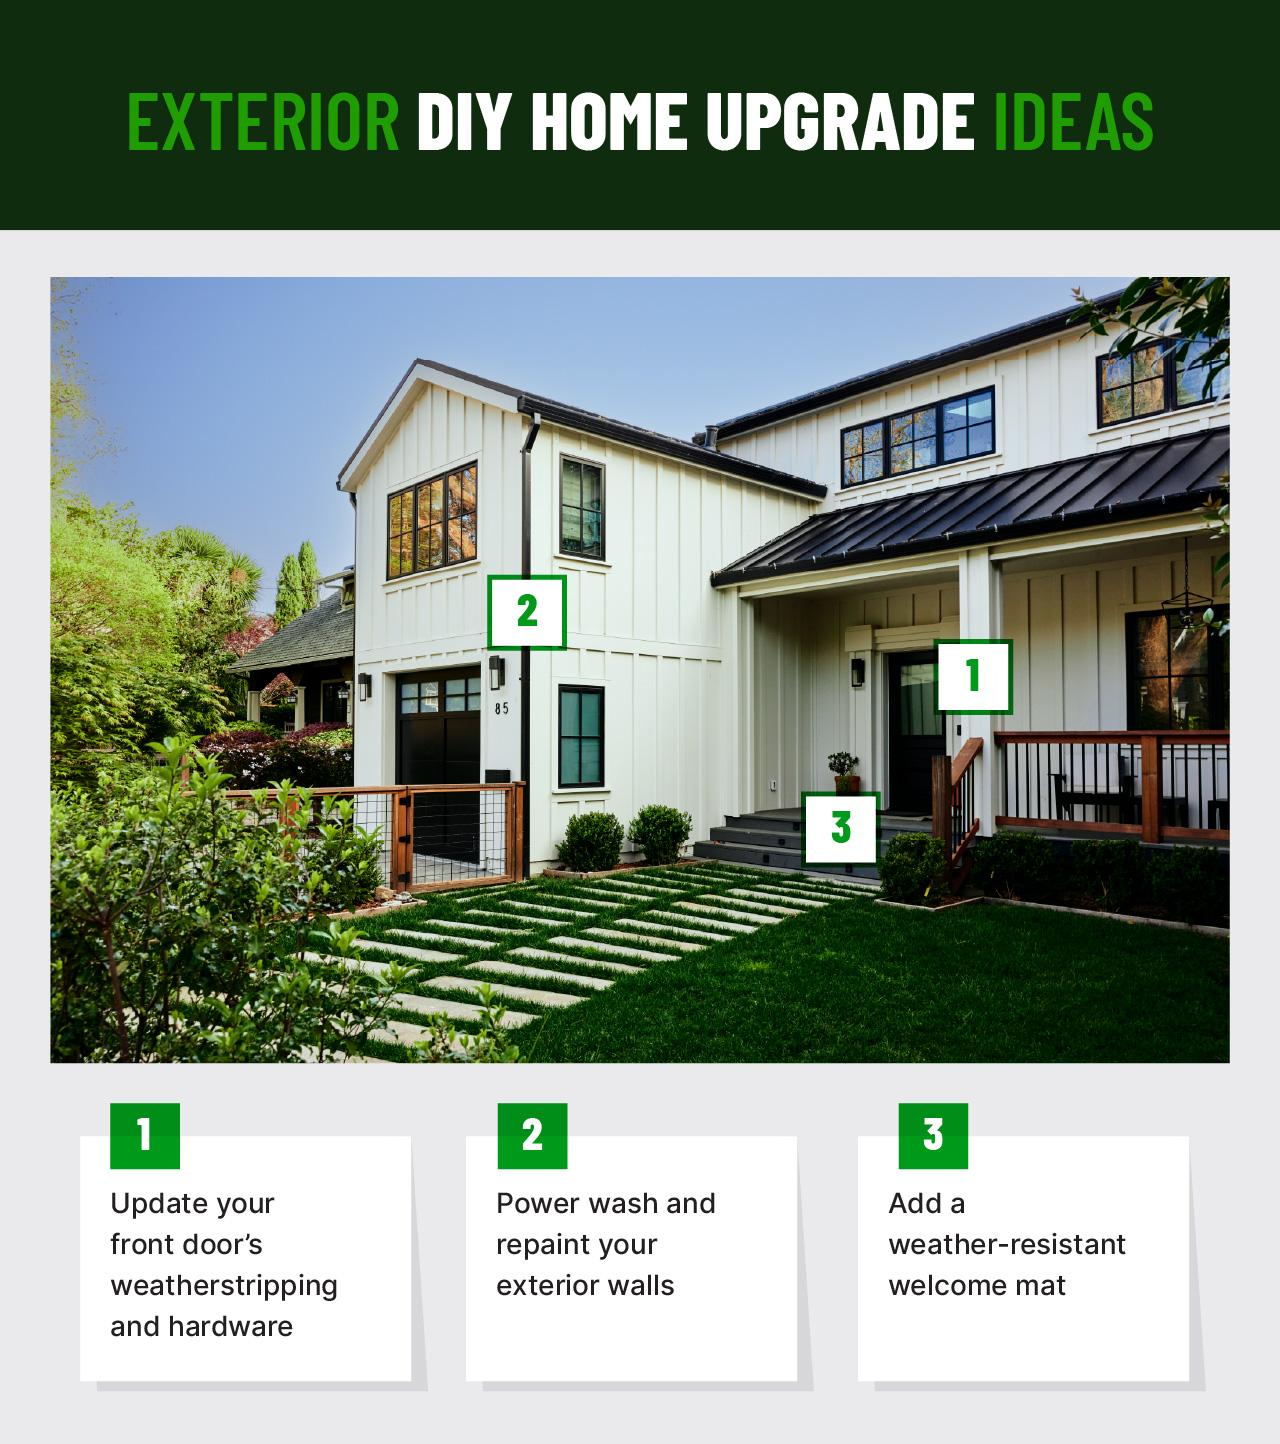 graphic showing exterior DIY home upgrade ideas on an example home